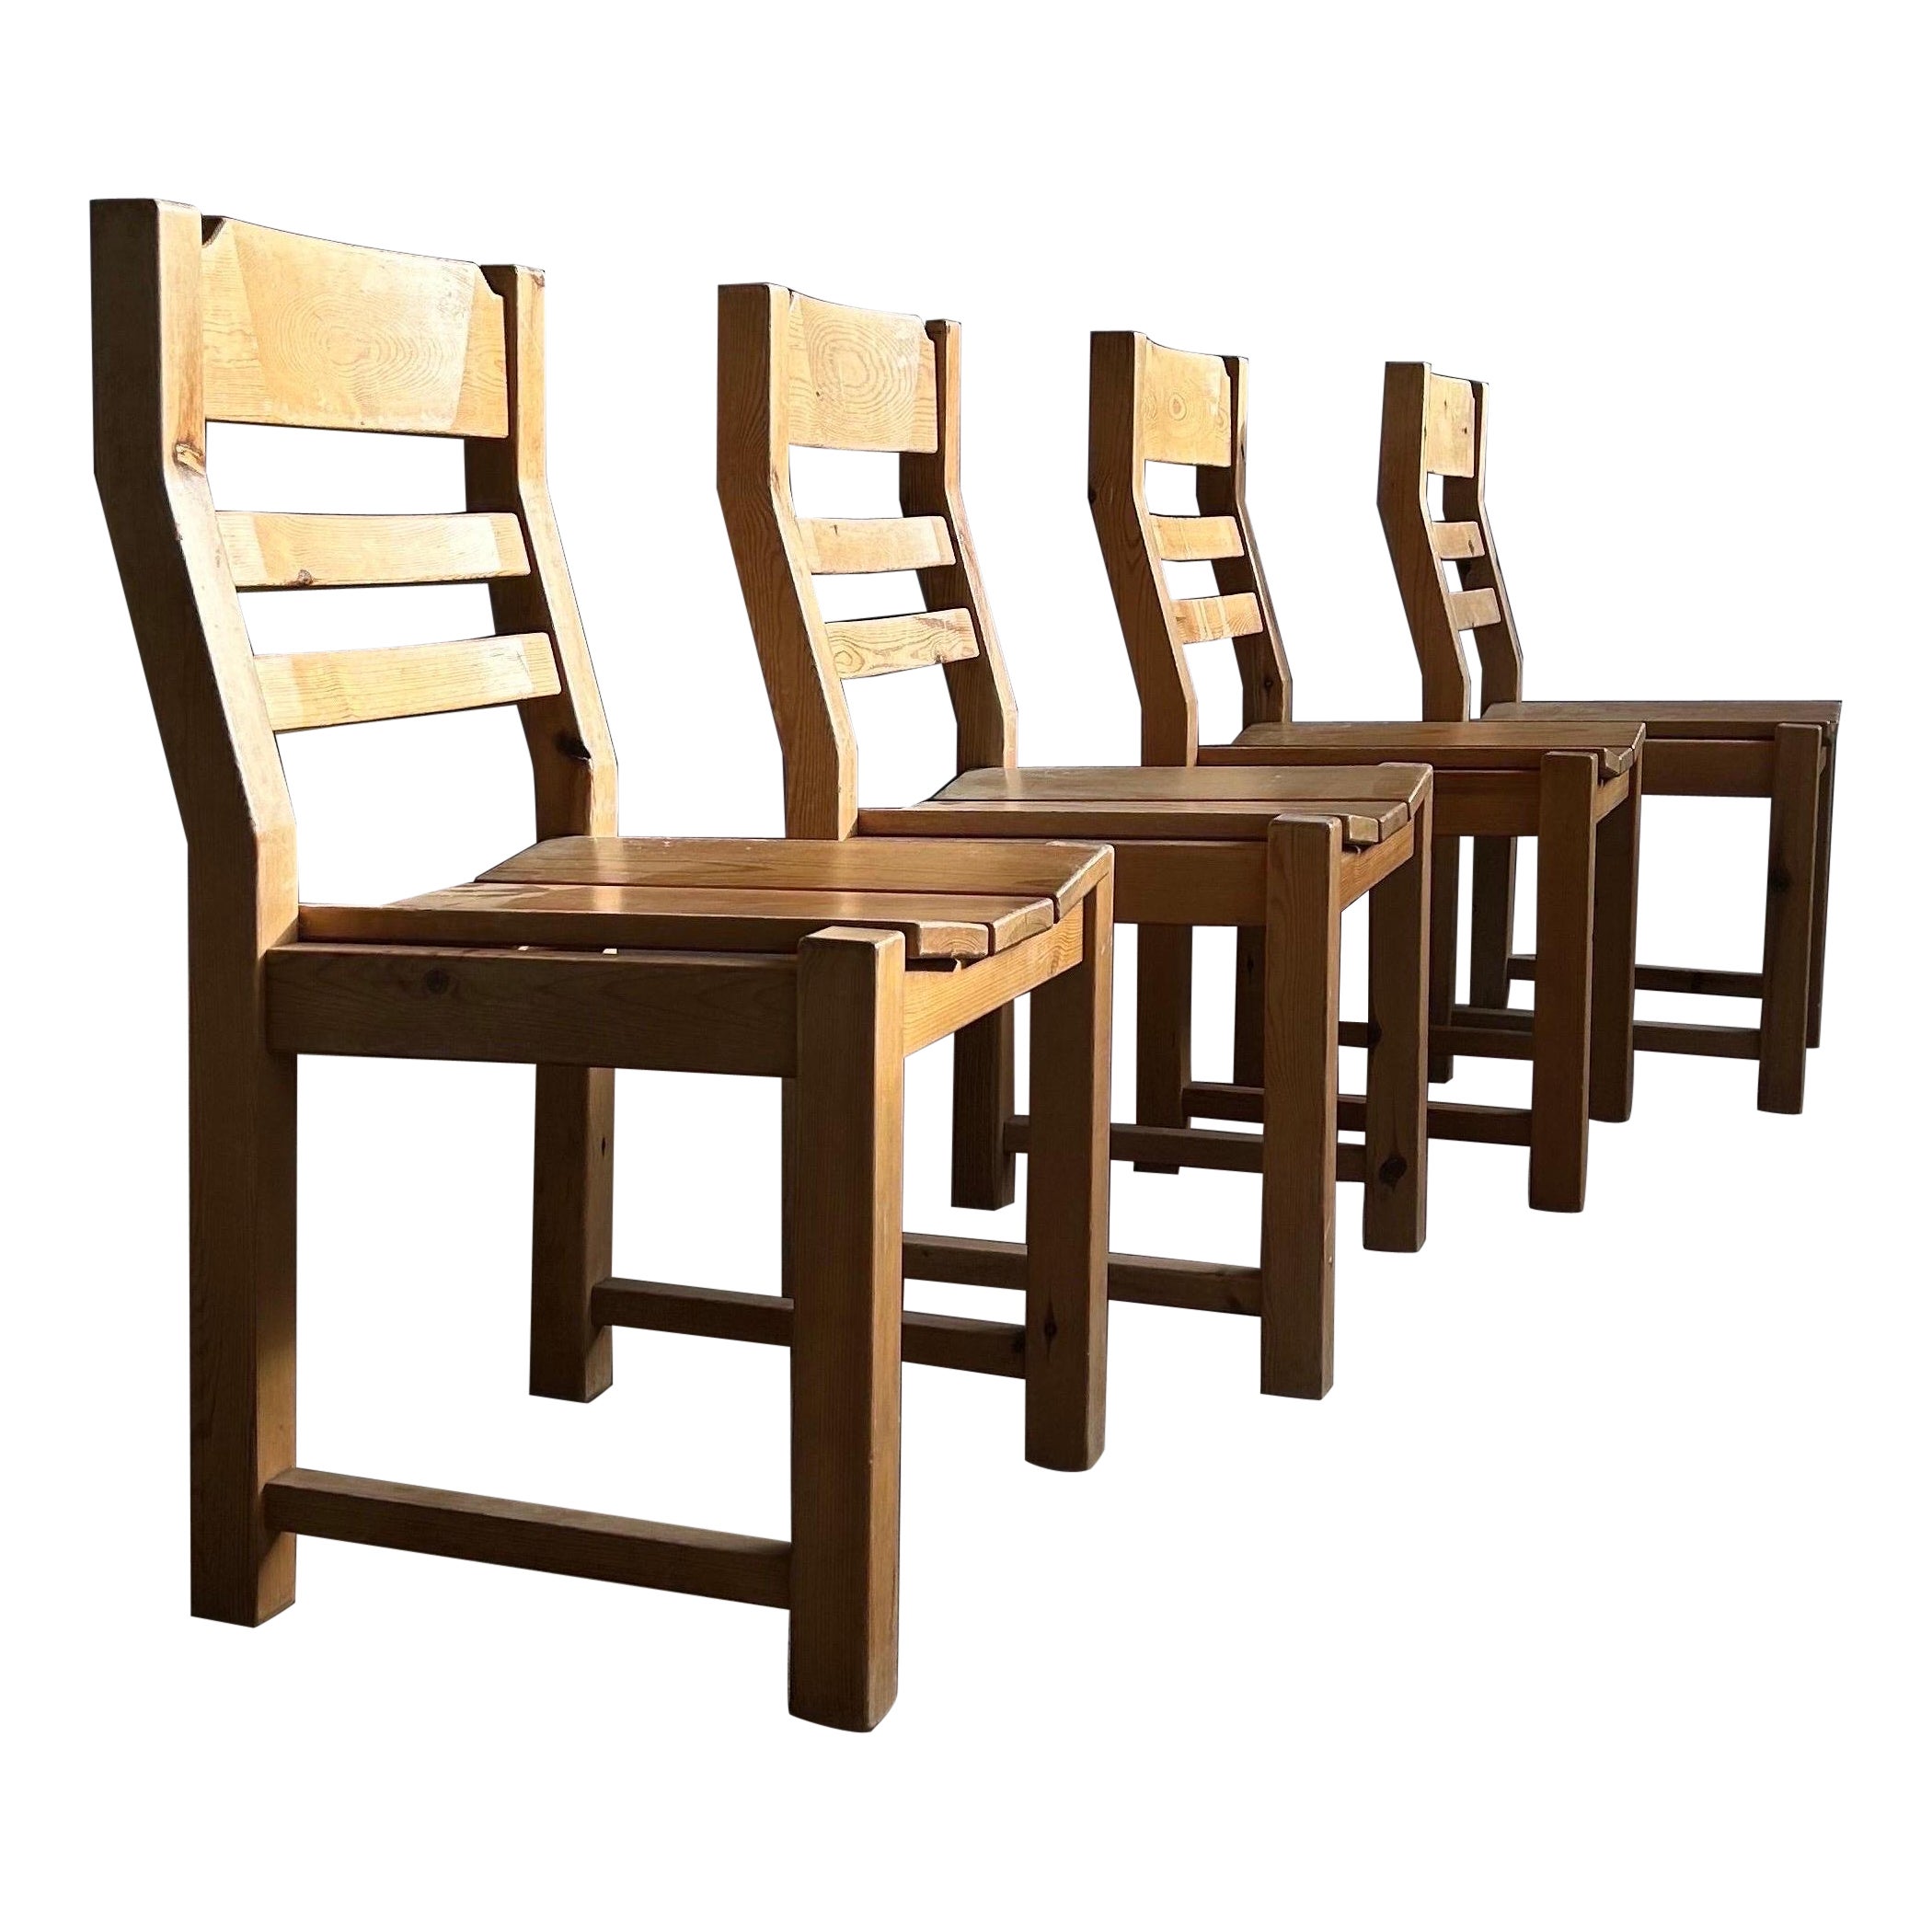 Set of Four Brutalist Pine Dining Chairs Denmark 1970s